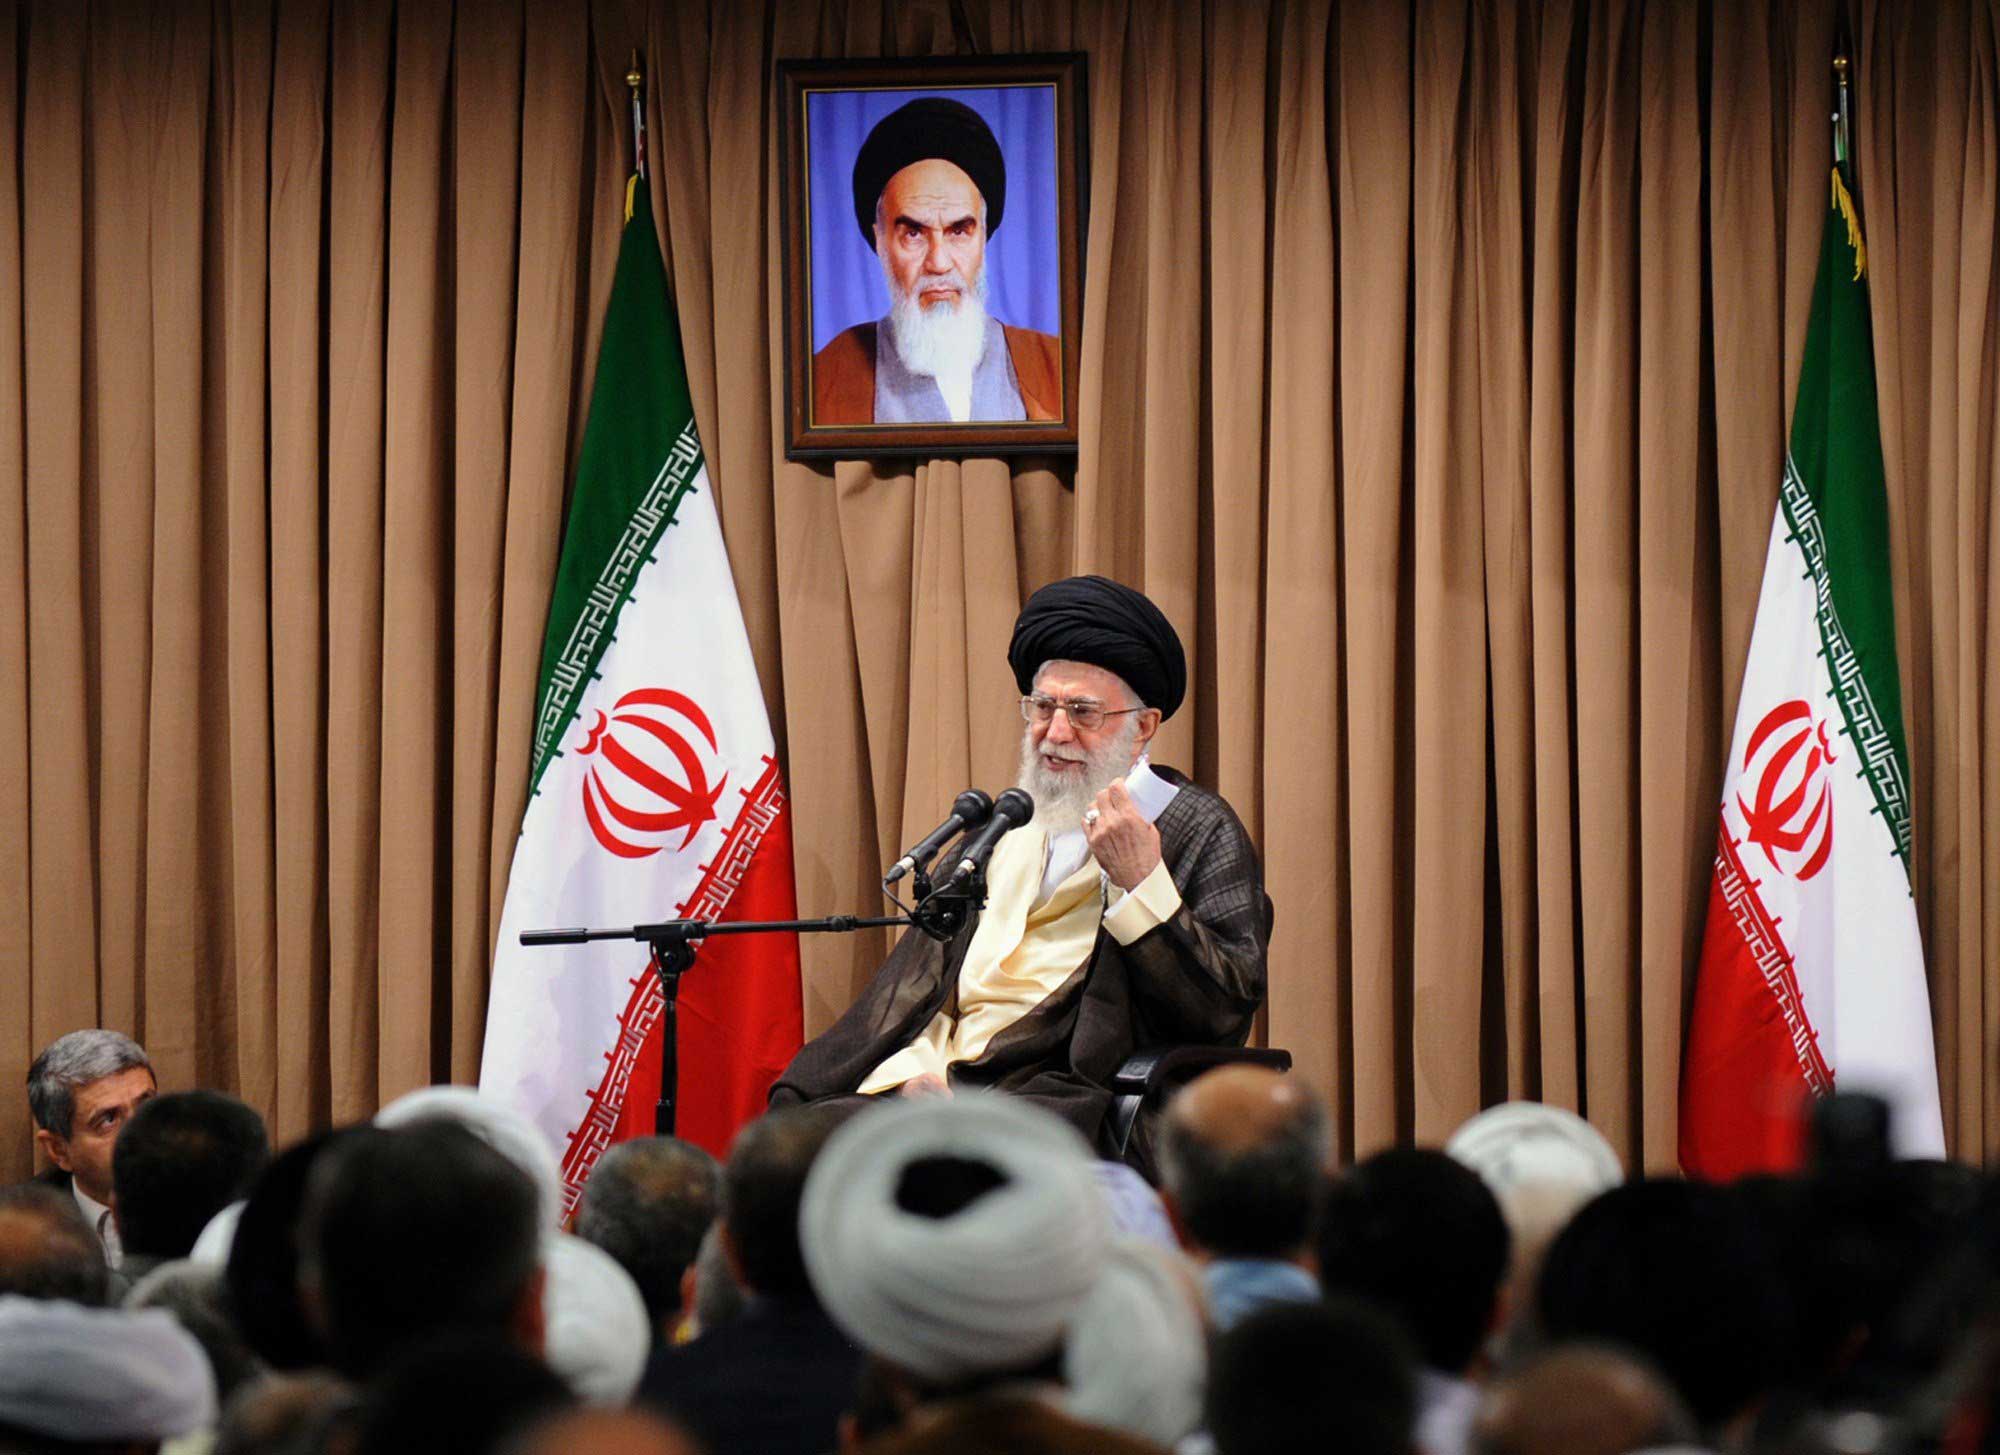 Iran's supreme leader, Ayatollah Ali Khamenei, addresses country's top officials during a meeting  in Tehran in which he restated his country's red lines for a nuclear deal with world powers on June 23, 2015. (AFP/Getty Images)